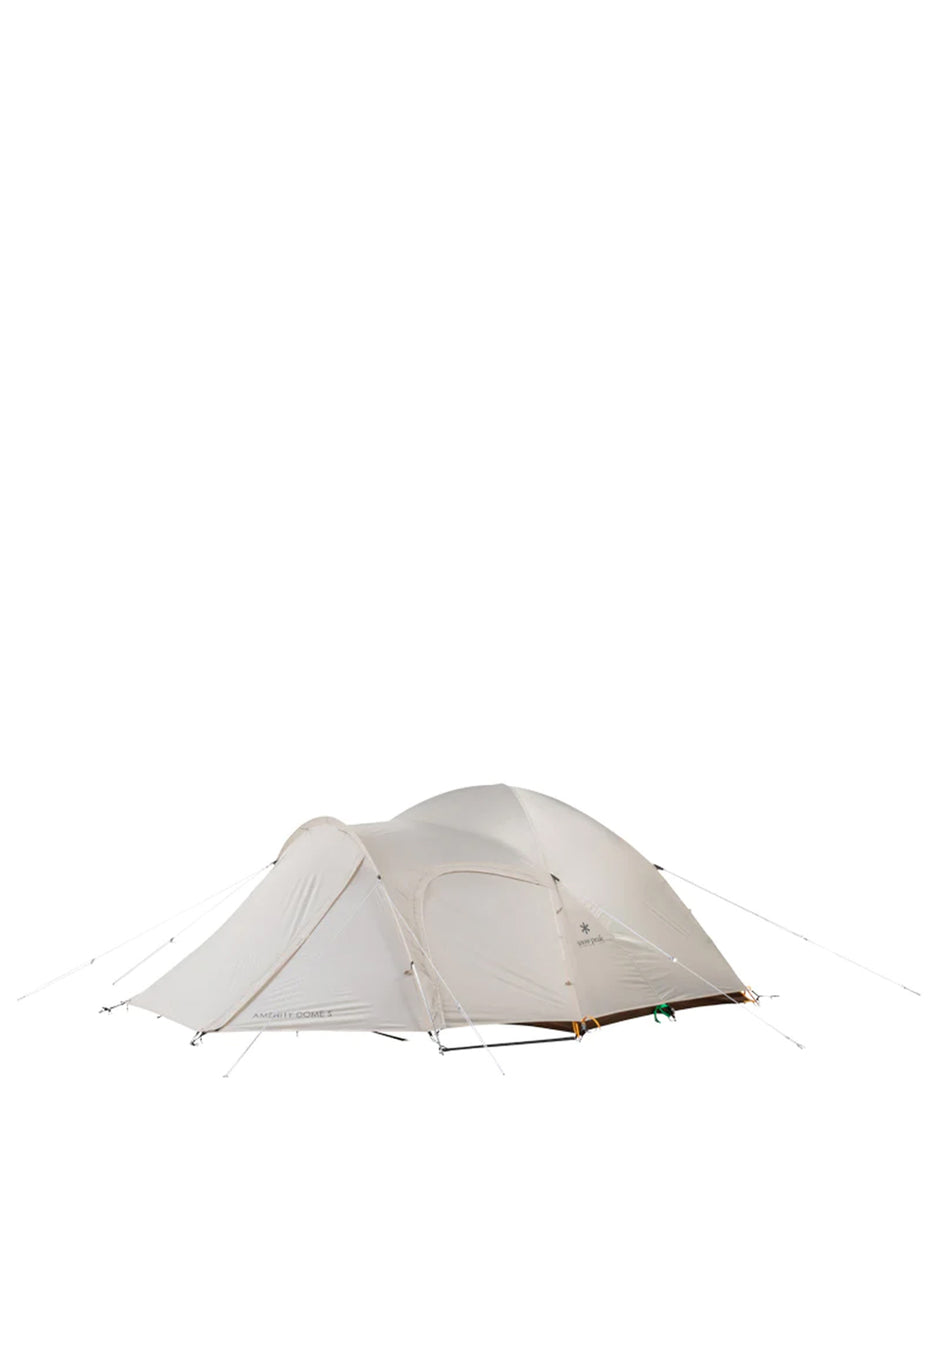 Snow Peak Amenity Dome S Ivory Tent - First Camp Rental